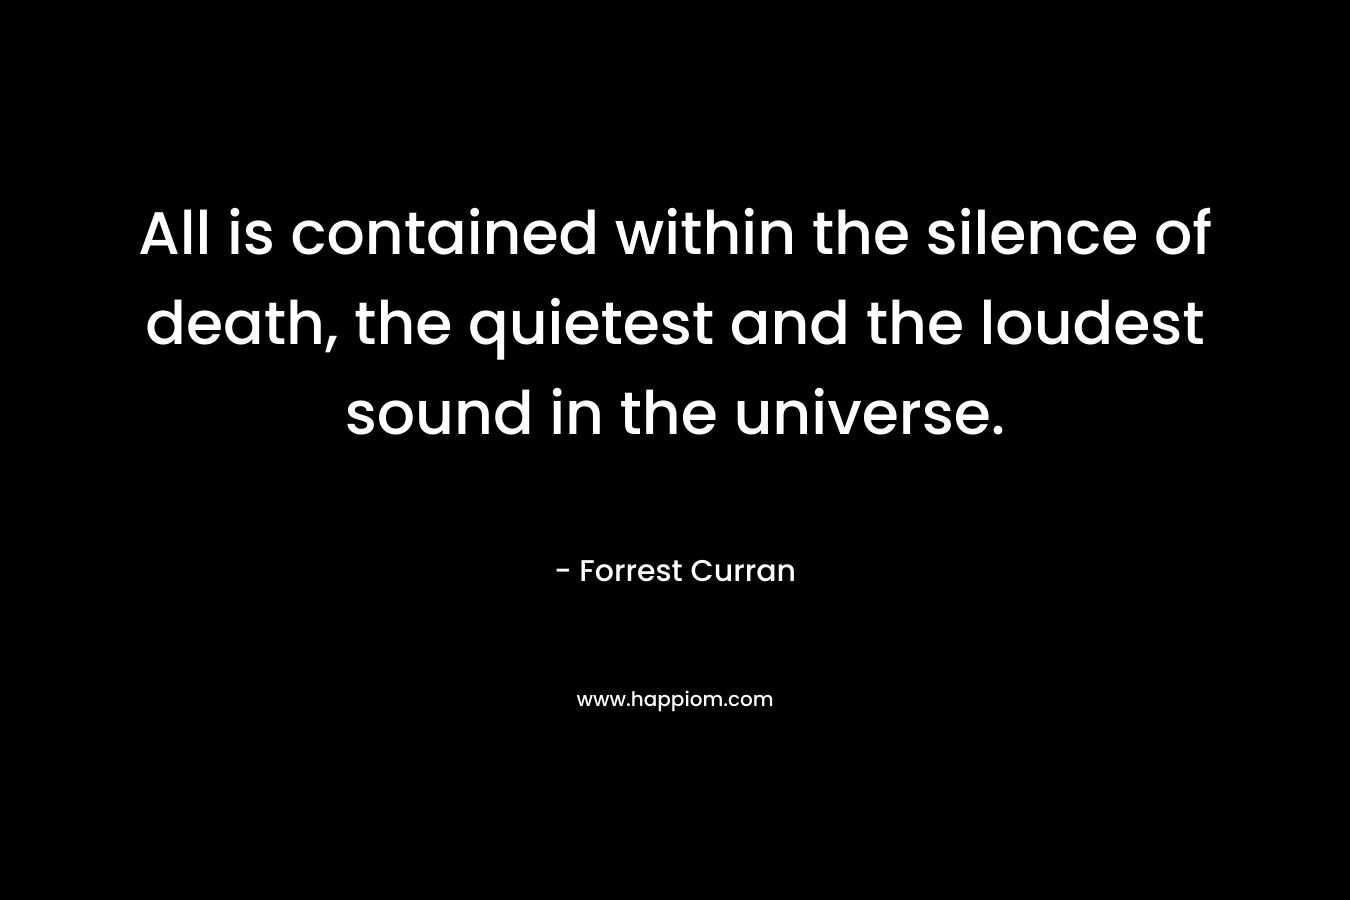 All is contained within the silence of death, the quietest and the loudest sound in the universe.